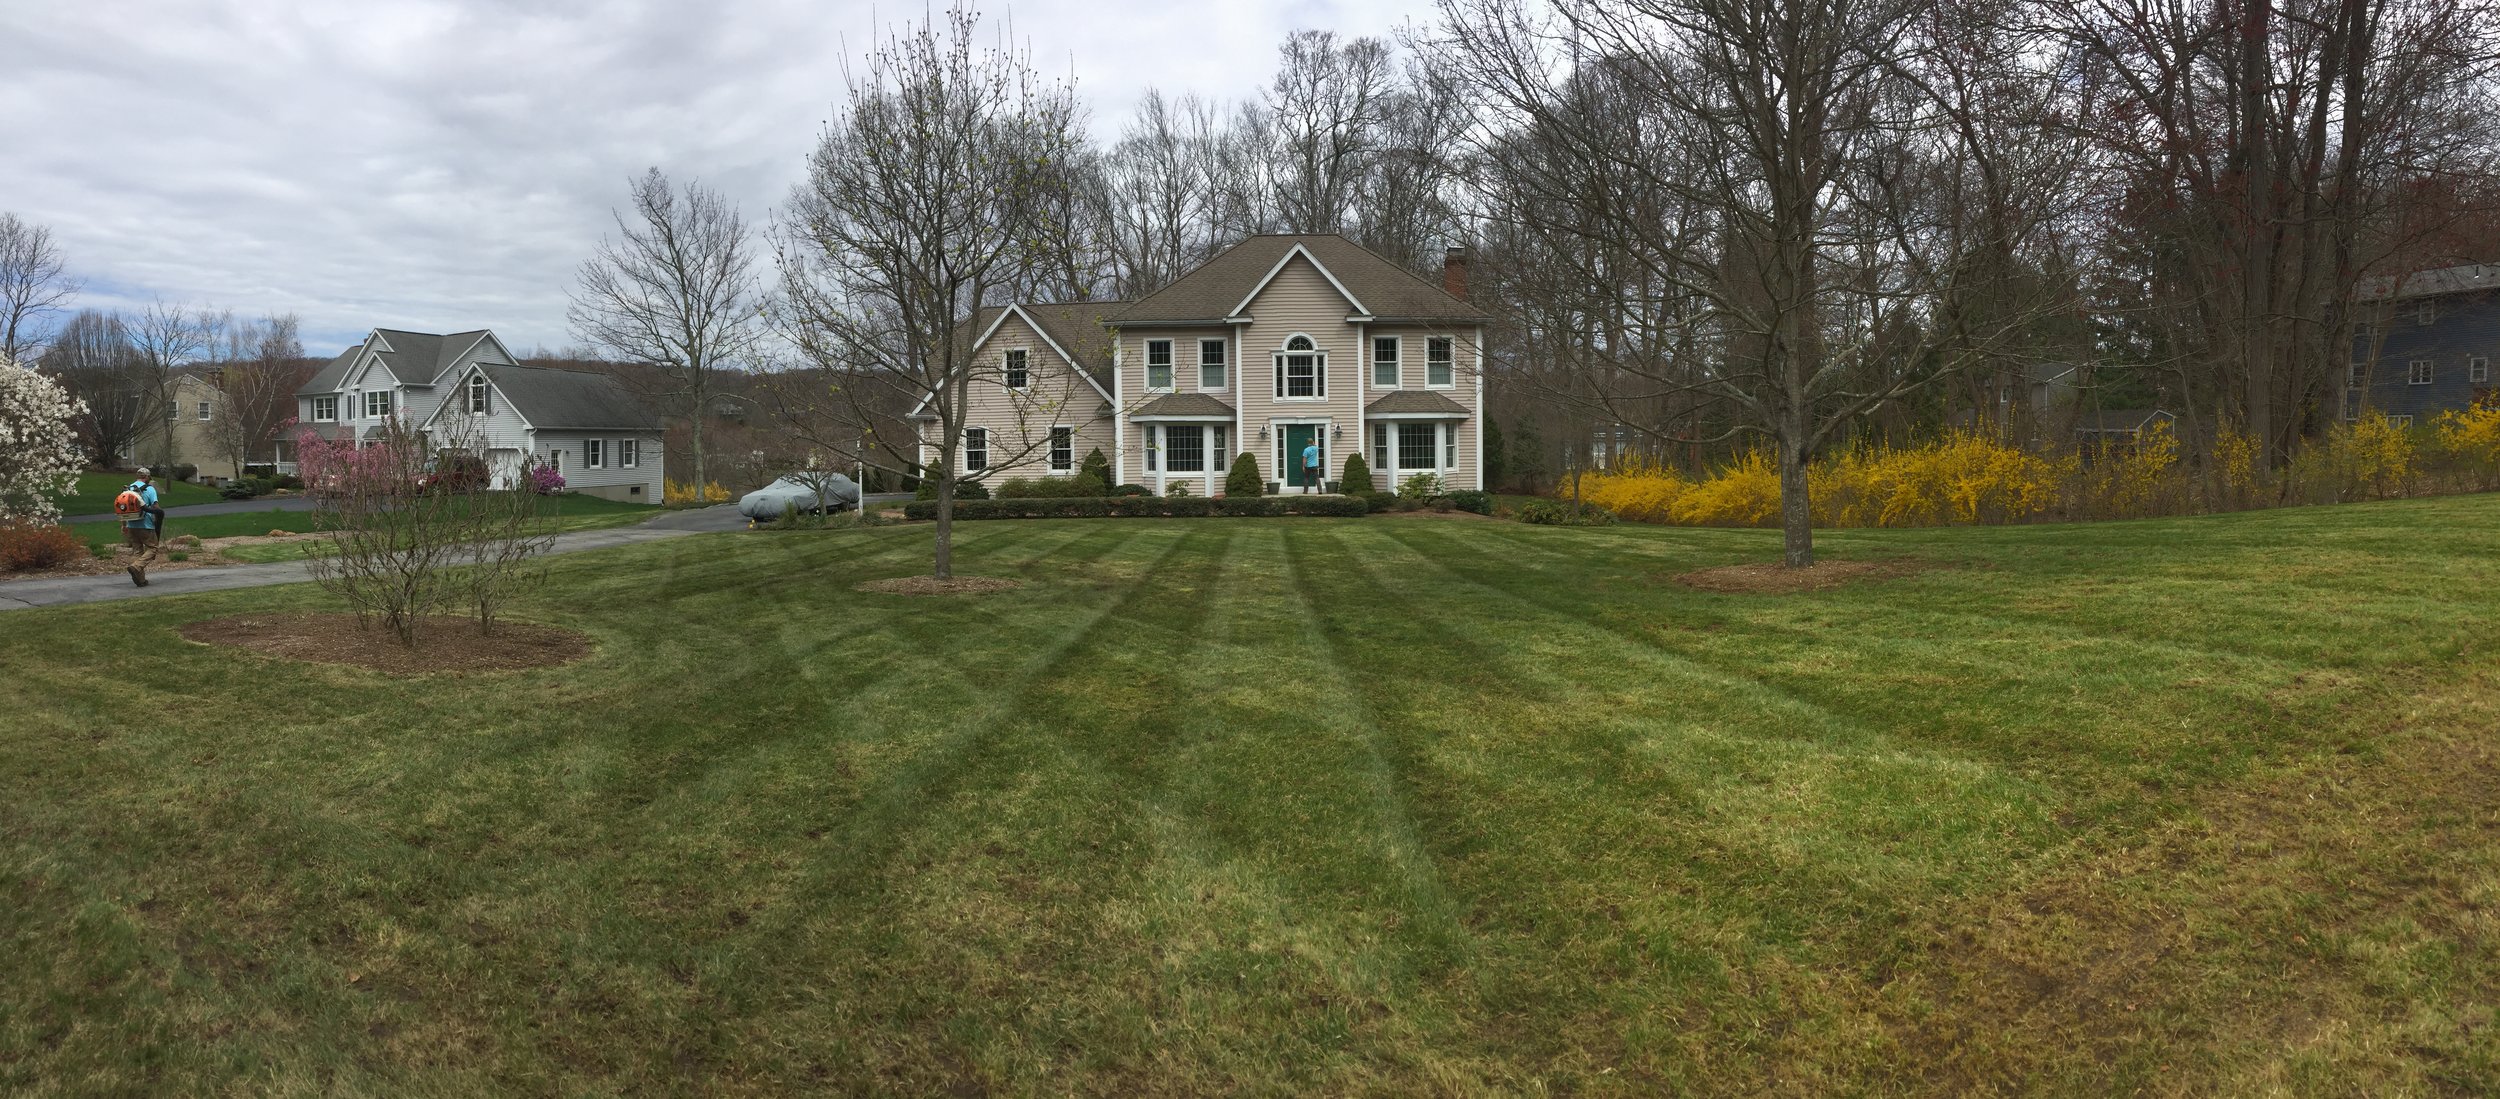 mccaffery-property-services-niantic-ct-mowing-spring-lawn-care.jpg